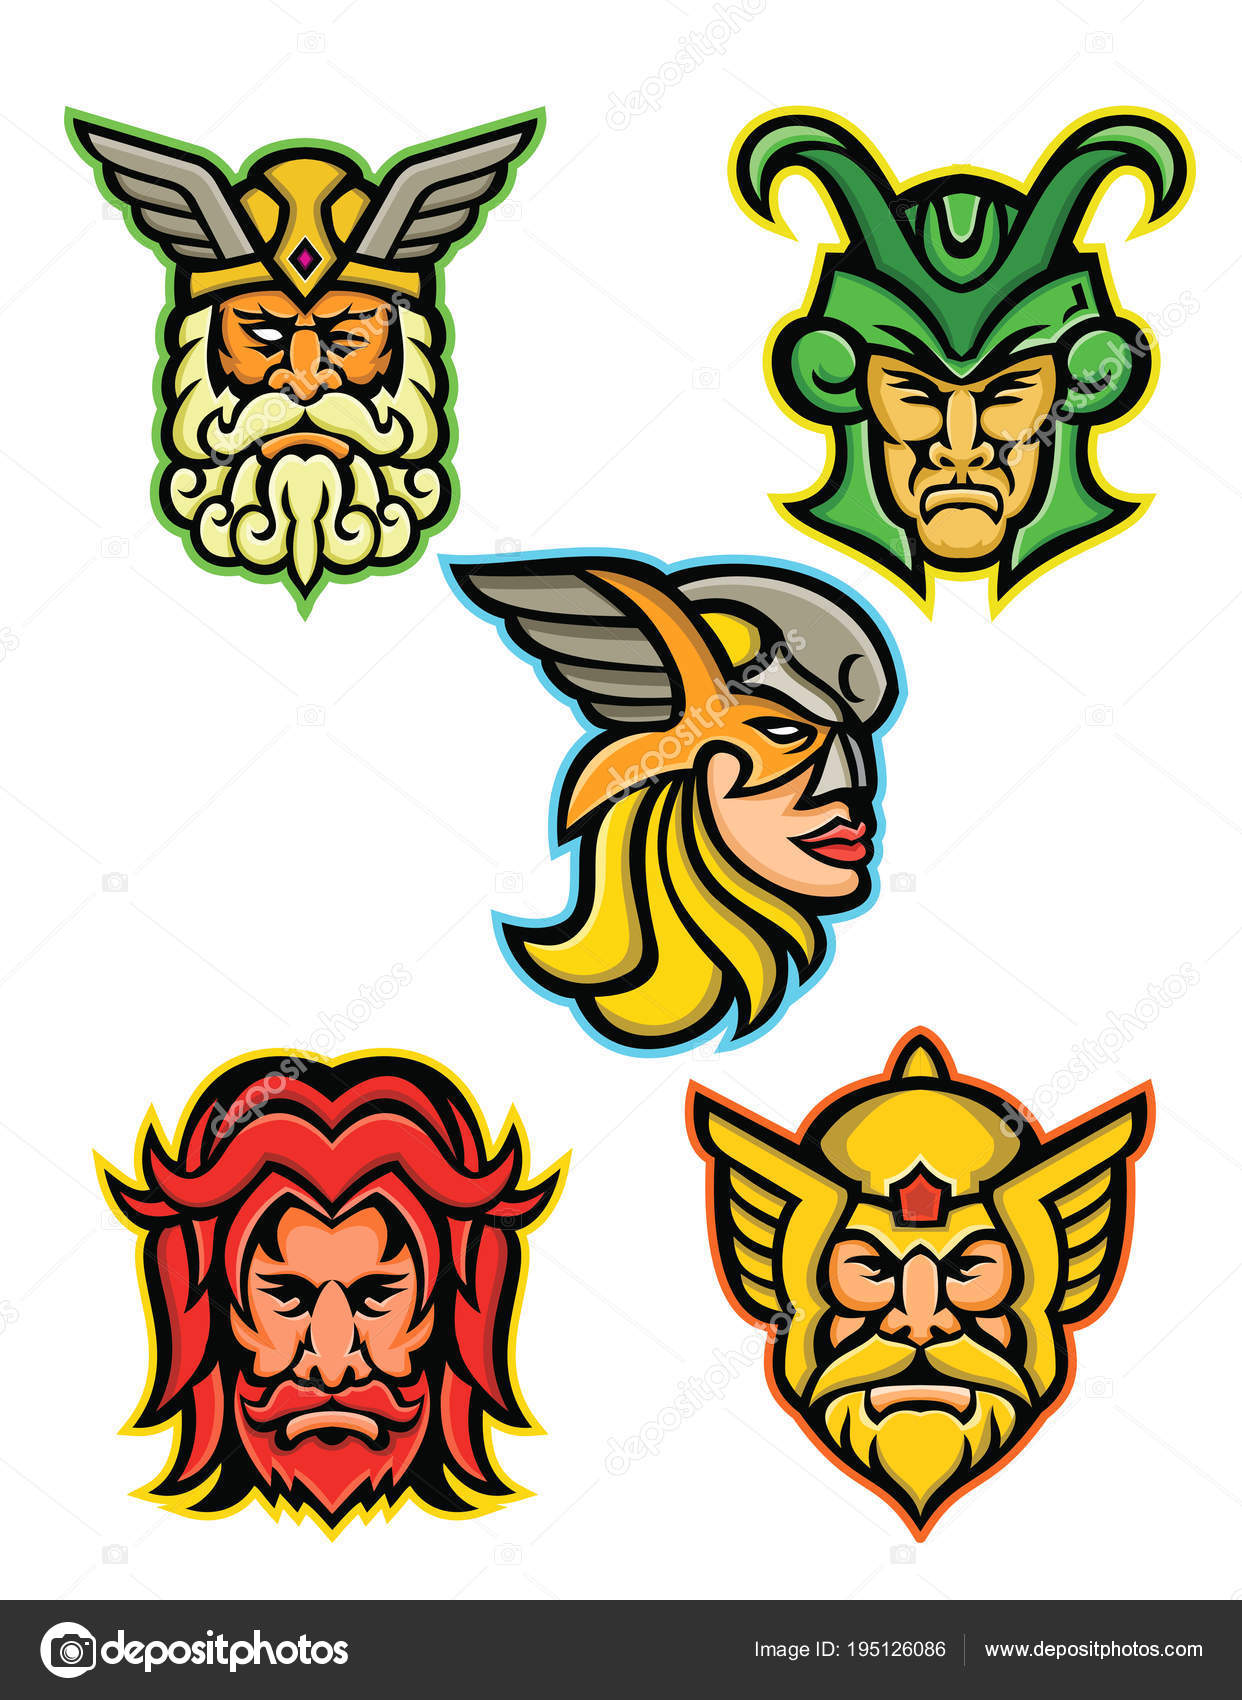 Norse Gods Mascot Collection Stock Image #195126086